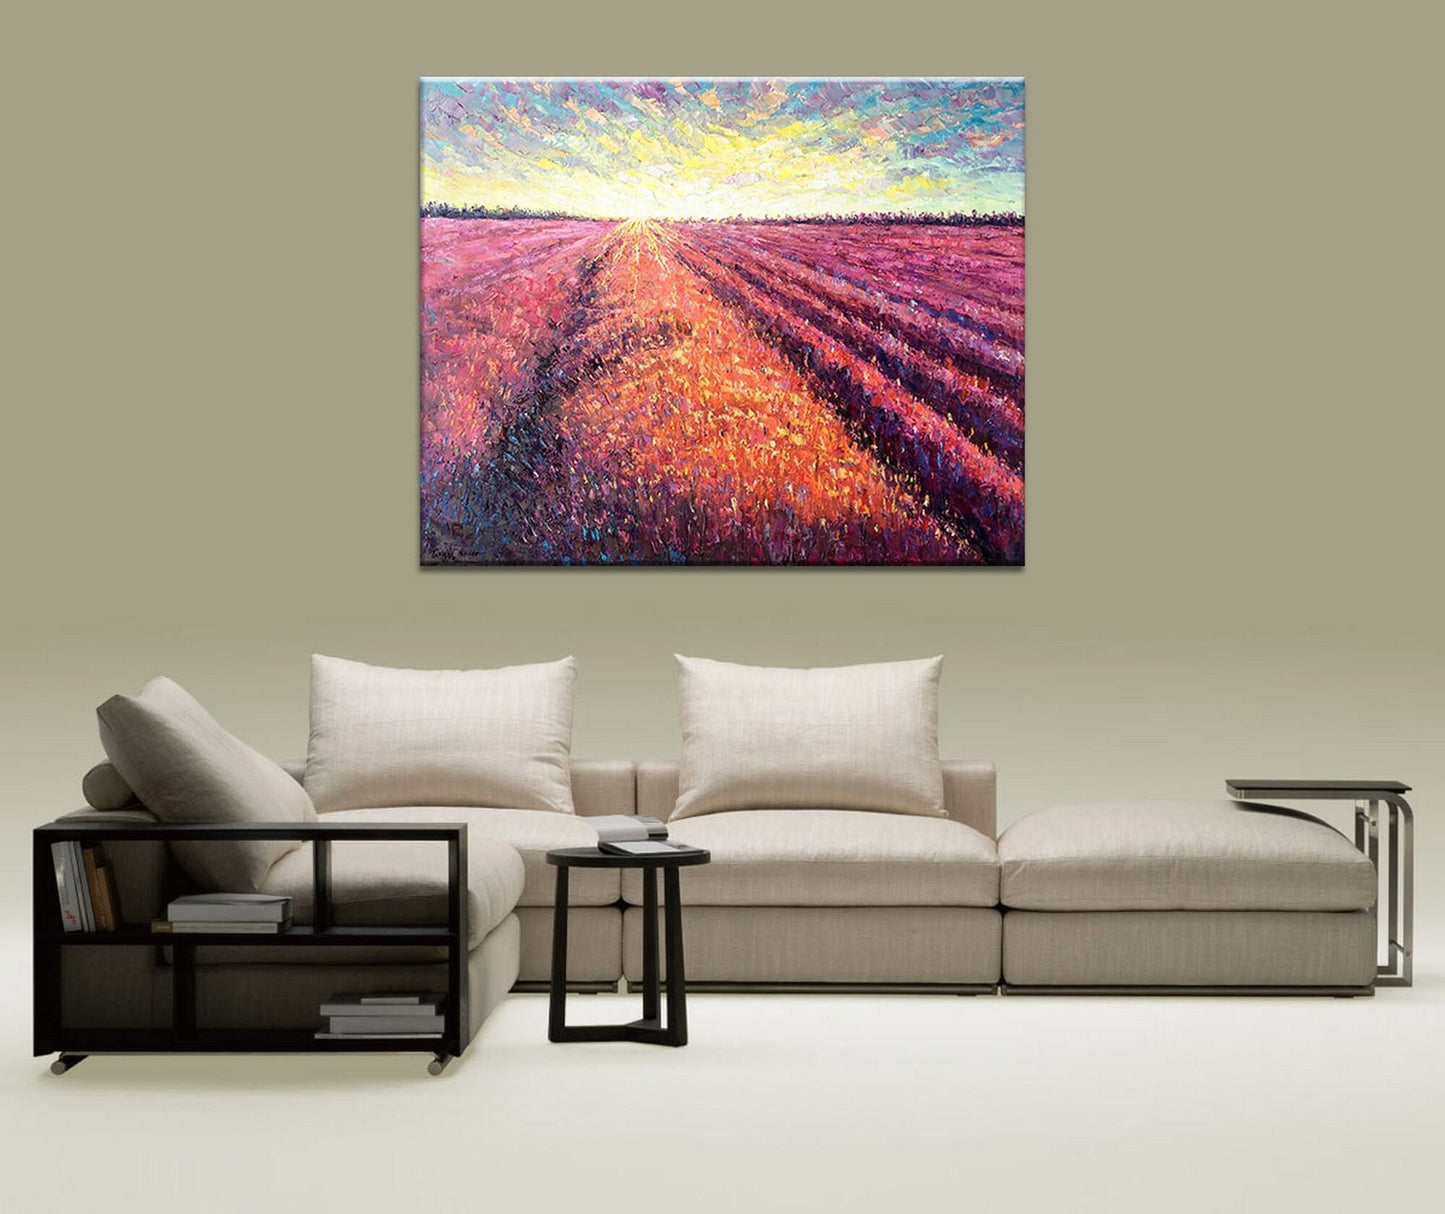 Landscape Oil Painting French Provence Lavender Fields At Dawn, Canvas Art, Paintings On Canvas, Abstract Landscape, Large Wall Art